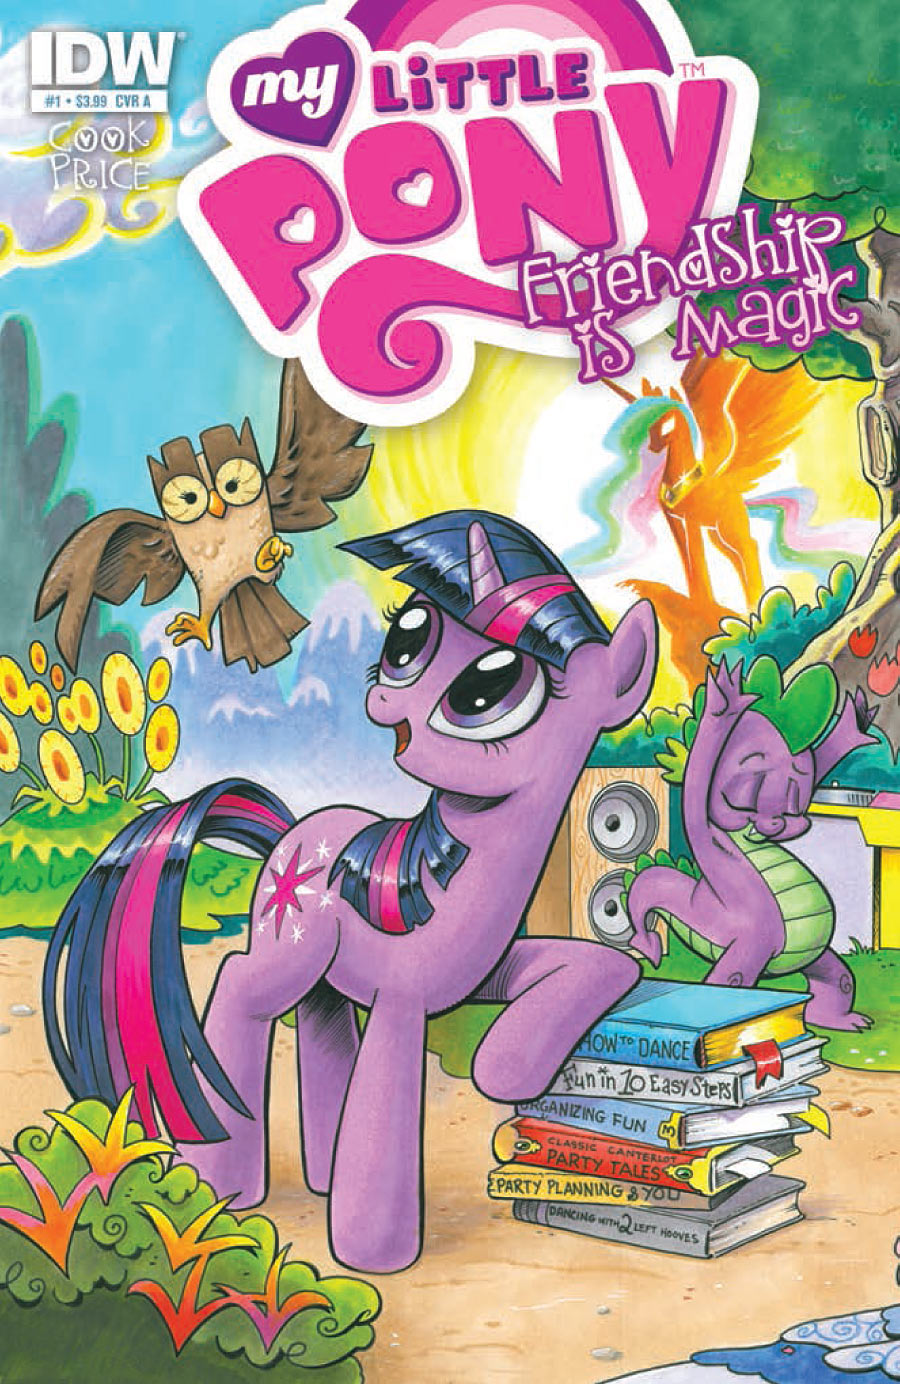 At opdage Markér Tilbageholdenhed The Beat Comic Reviews for 28/11/12: My Little Pony and Hellblazer,  together at last!